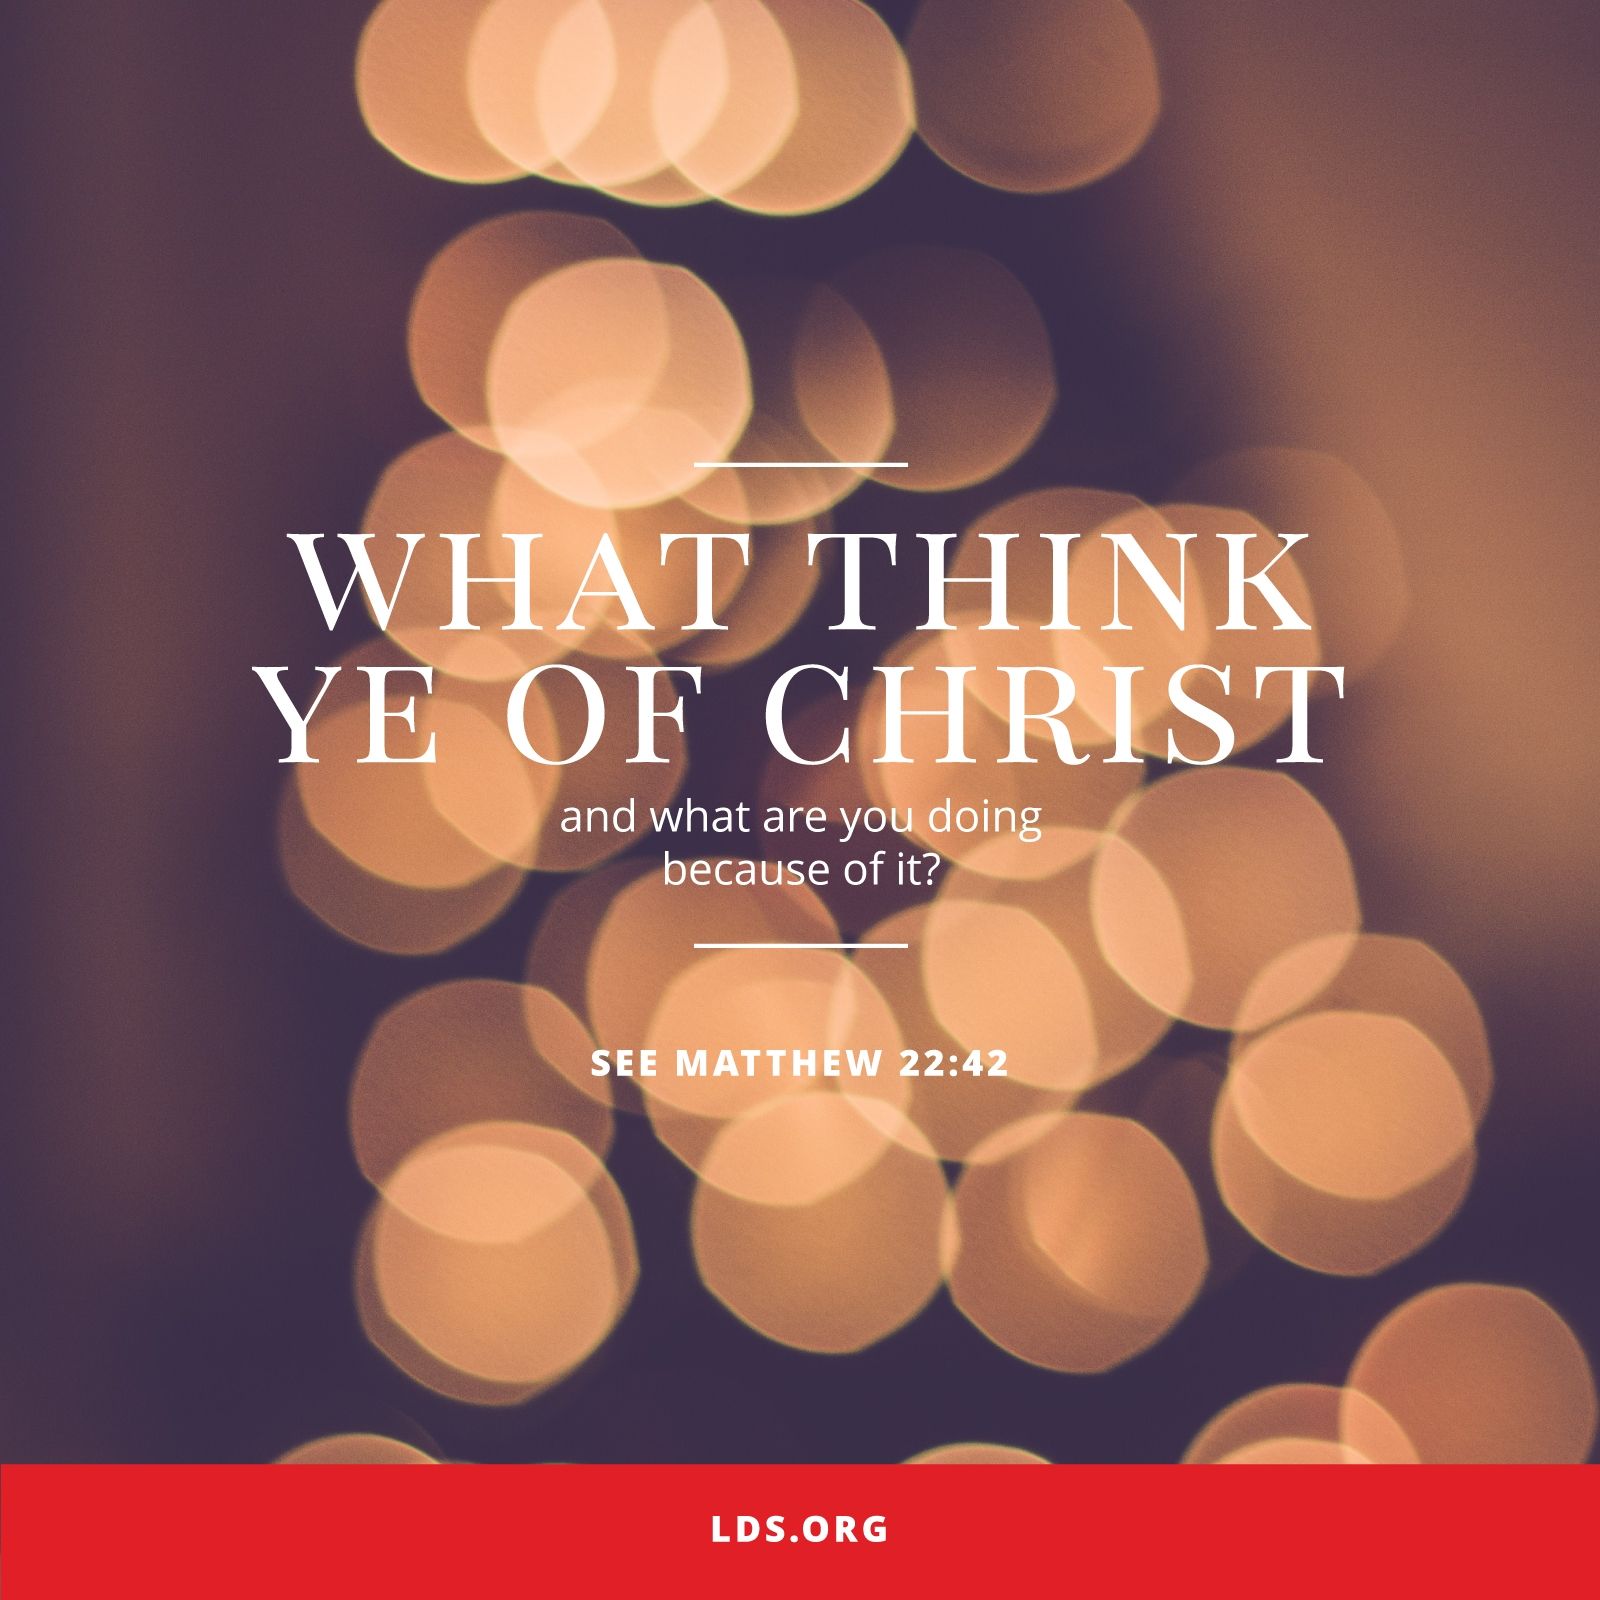 “What think ye of Christ?” And what are you doing because of it? See Matthew 22:42. © undefined ipCode 1.